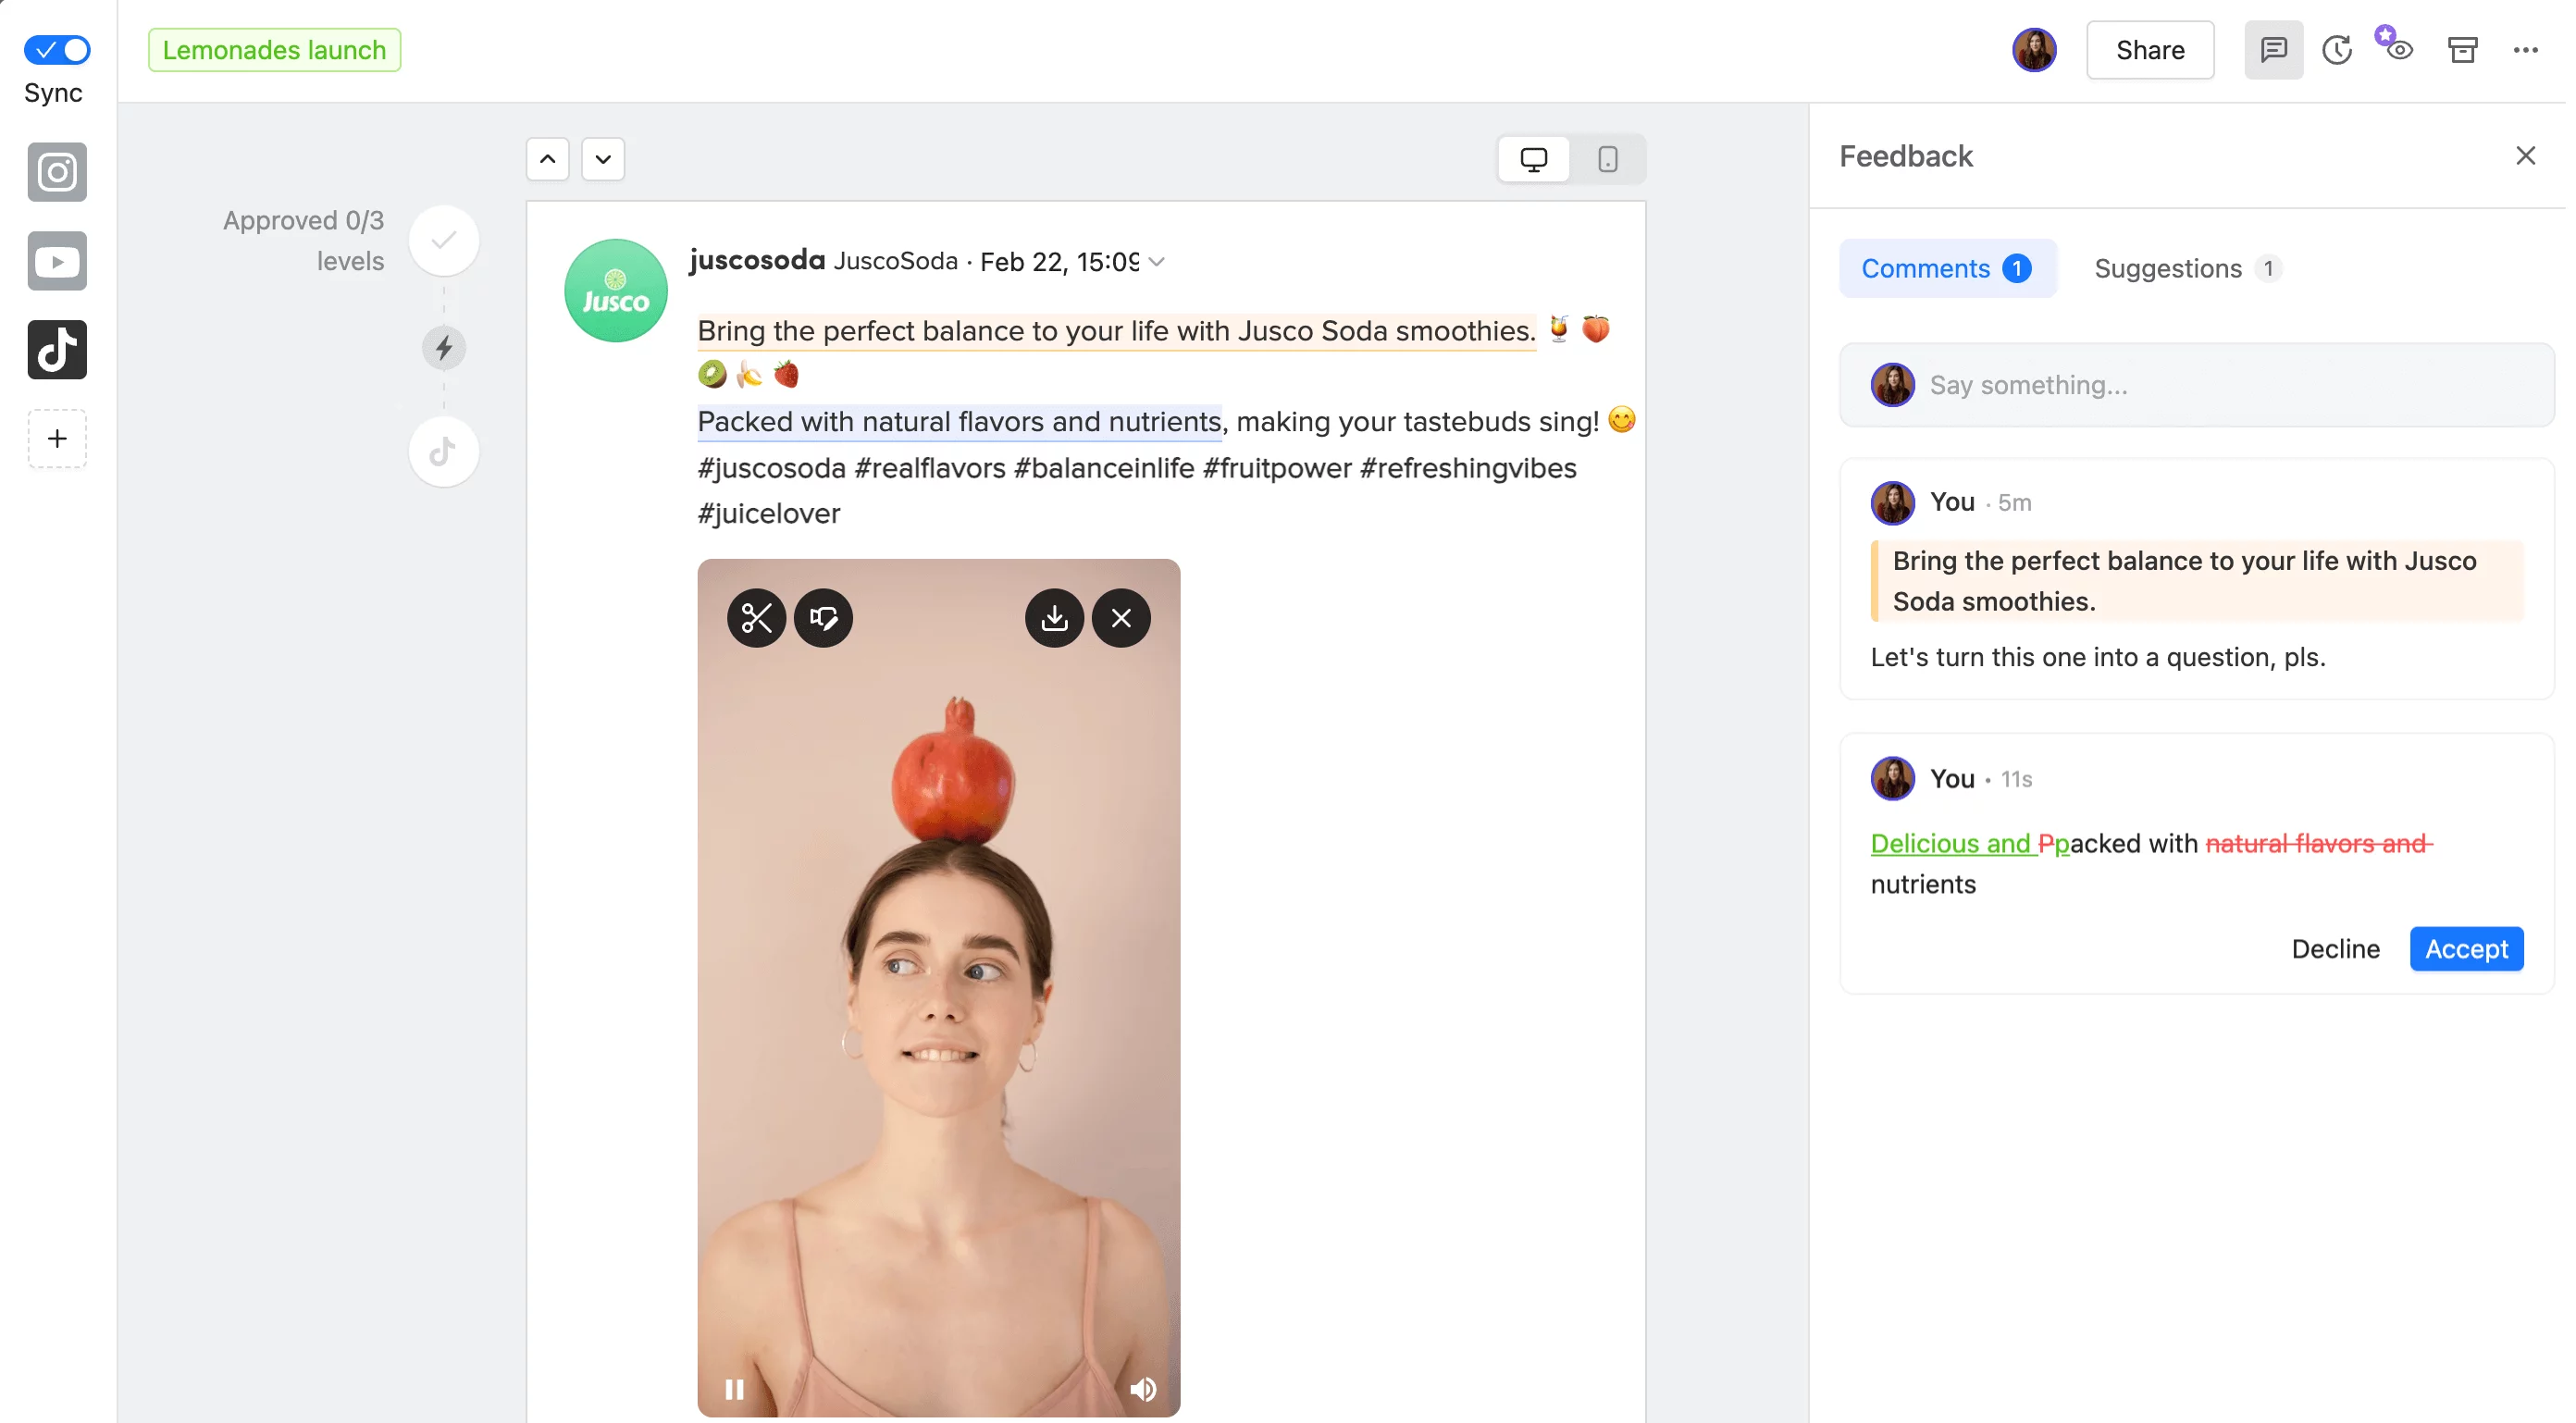 Collaboration in planable with comments and suggestions upon a TikTok post that's going to be scheduled and published